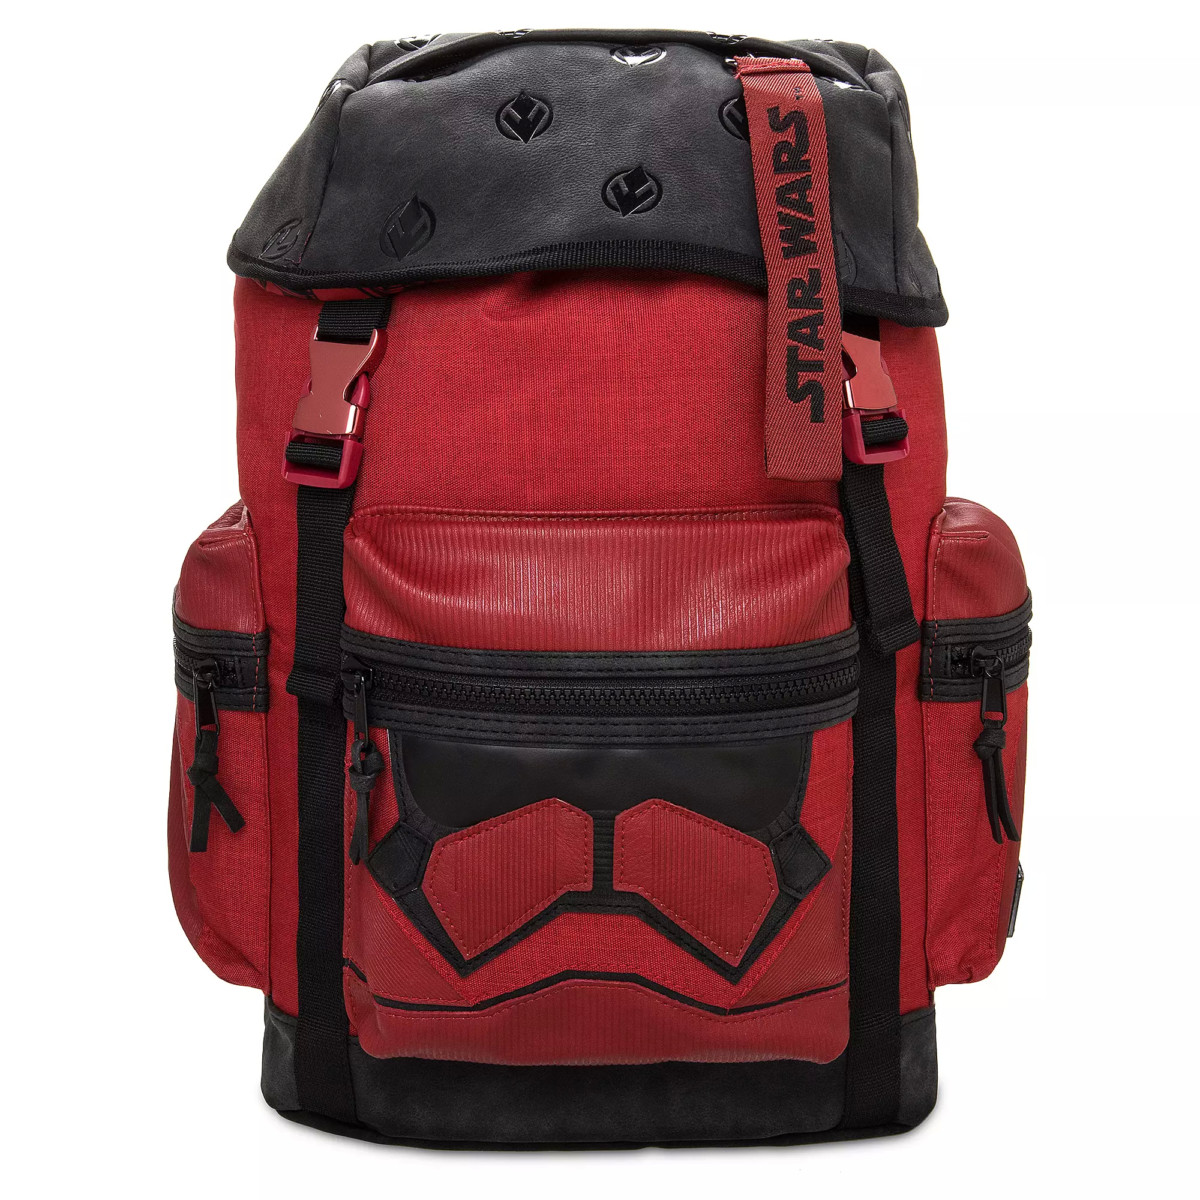 D23 Member Sith Trooper Backpack by Loungefly Star Wars The Rise of Skywalker